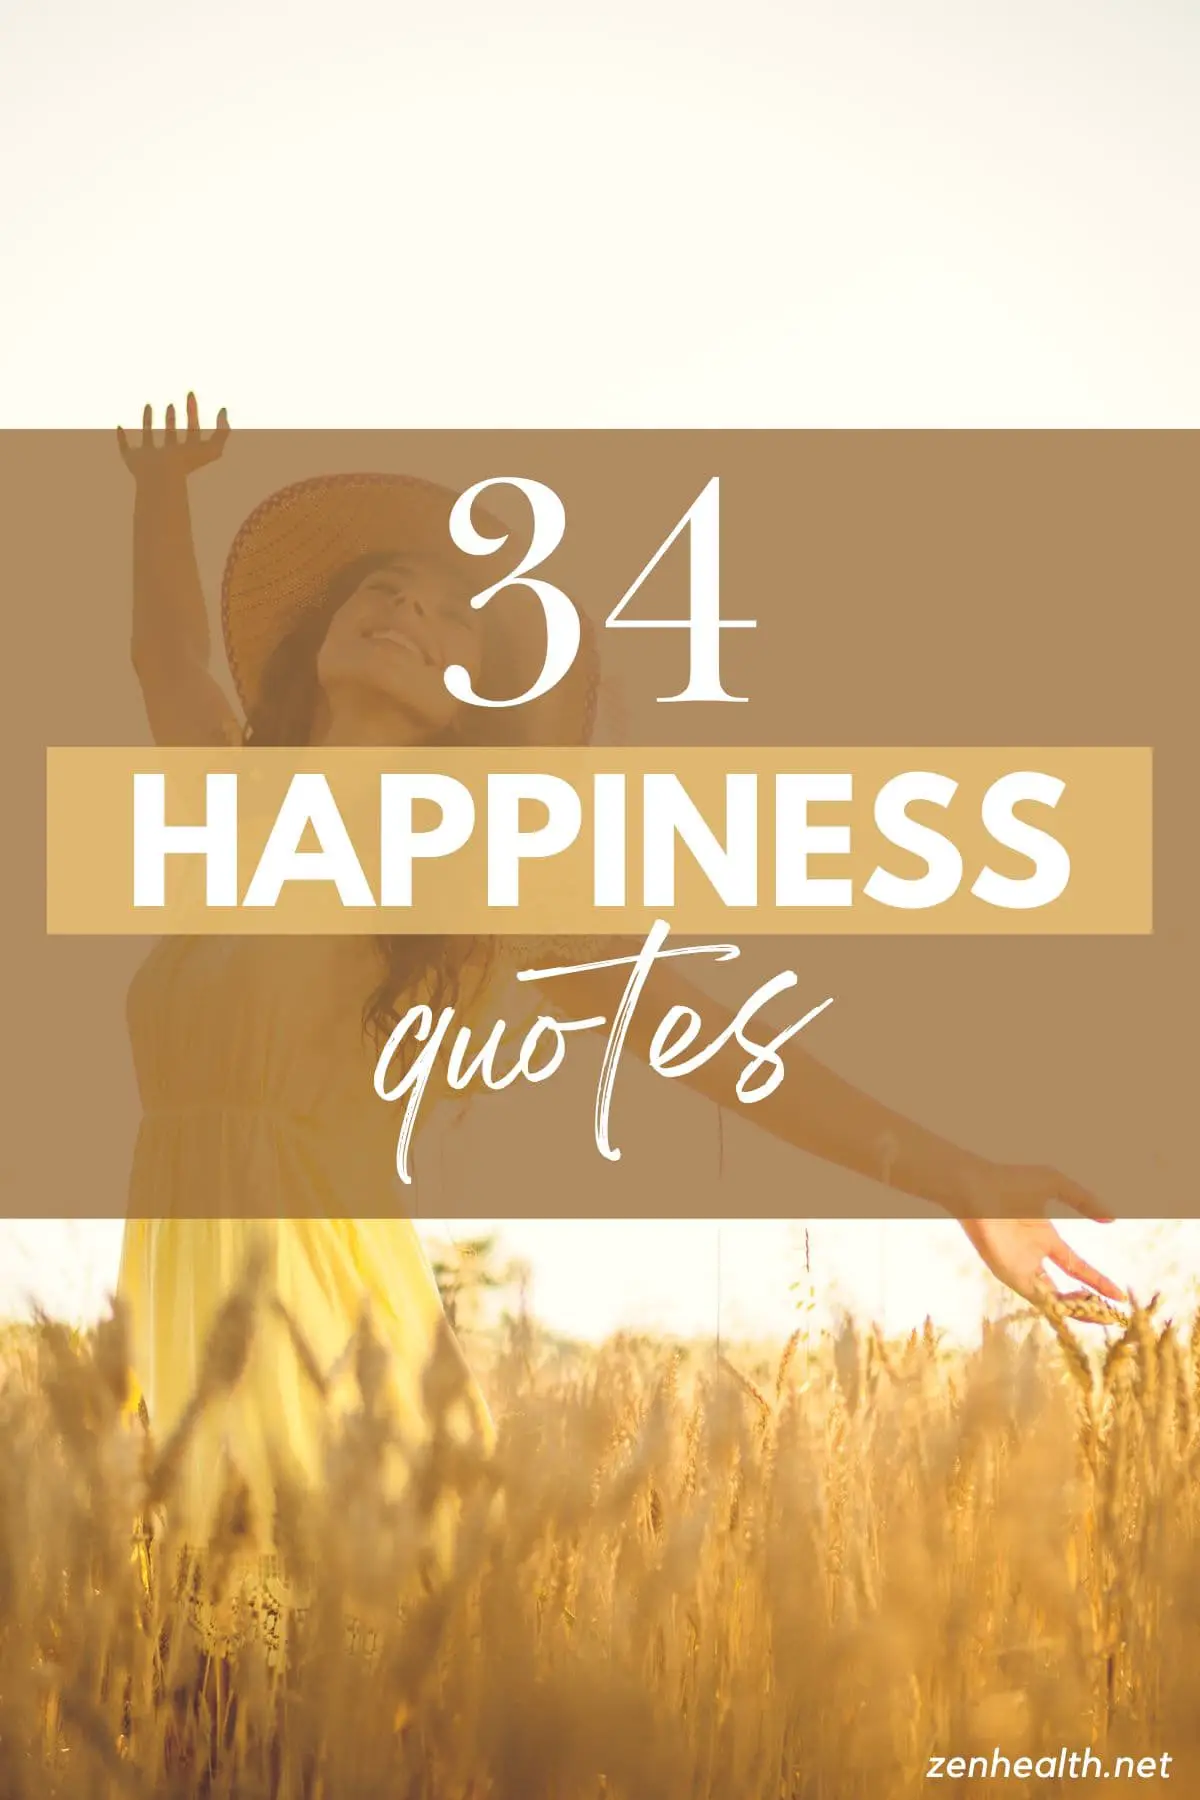 34 happiness quotes text overlay on a woman in a wheat field with her arms in the air smiling